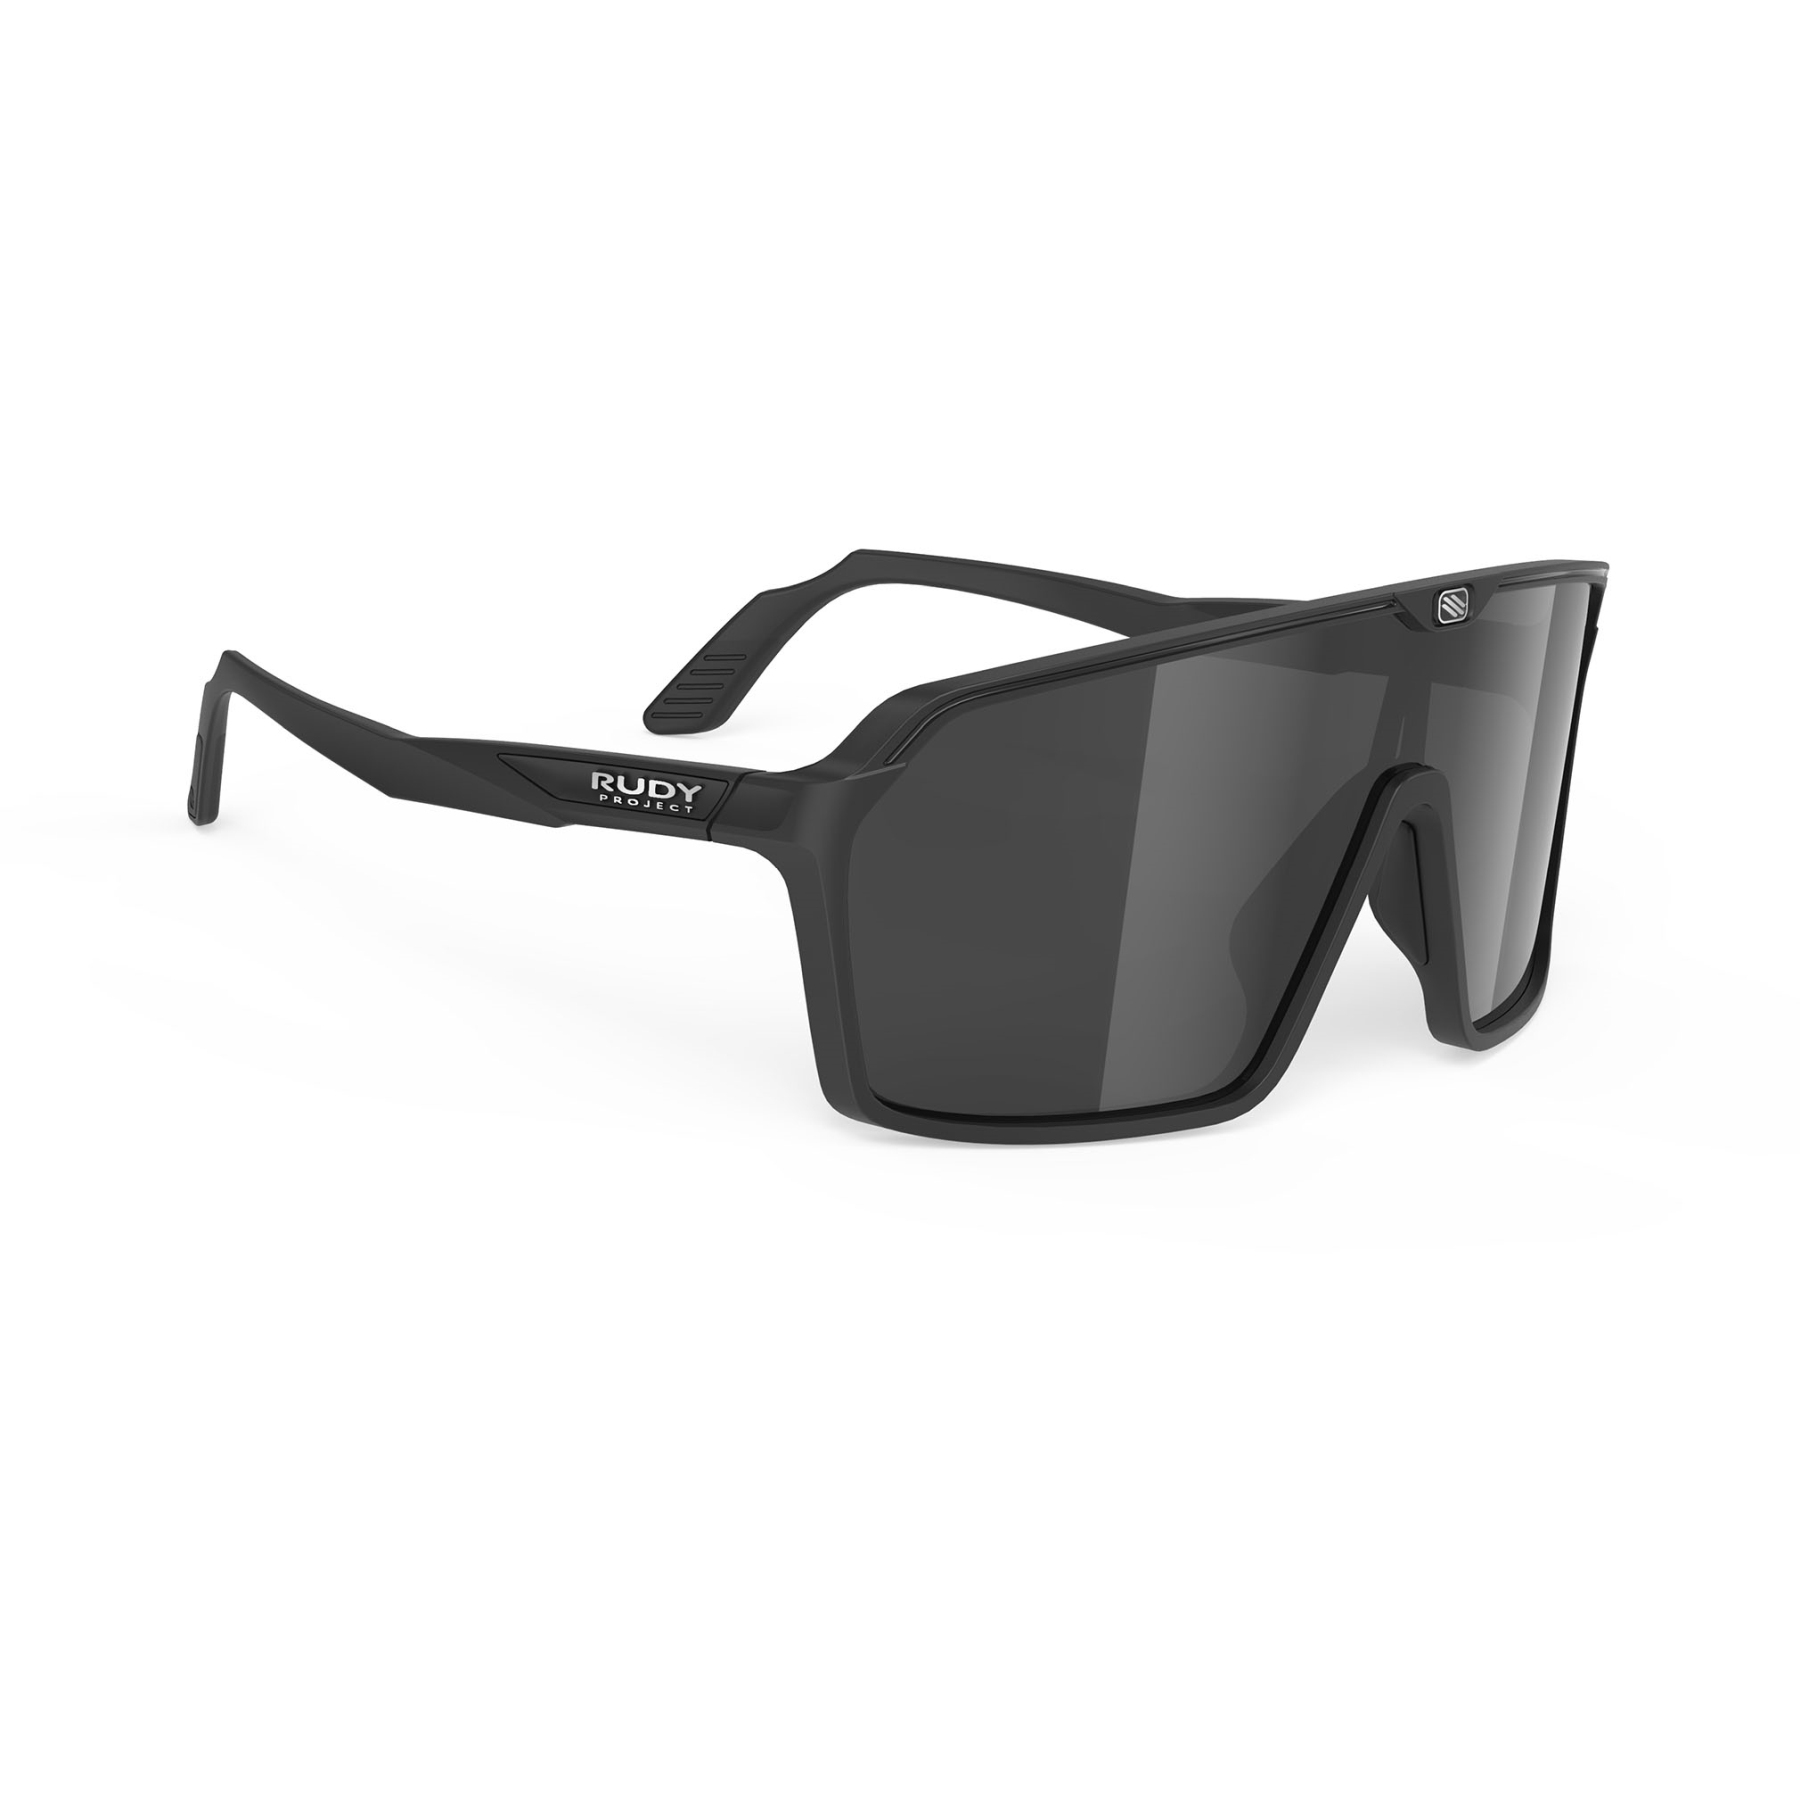 Picture of Rudy Project Spinshield Glasses - Black Matte/Smoke Black - SP721006-0000